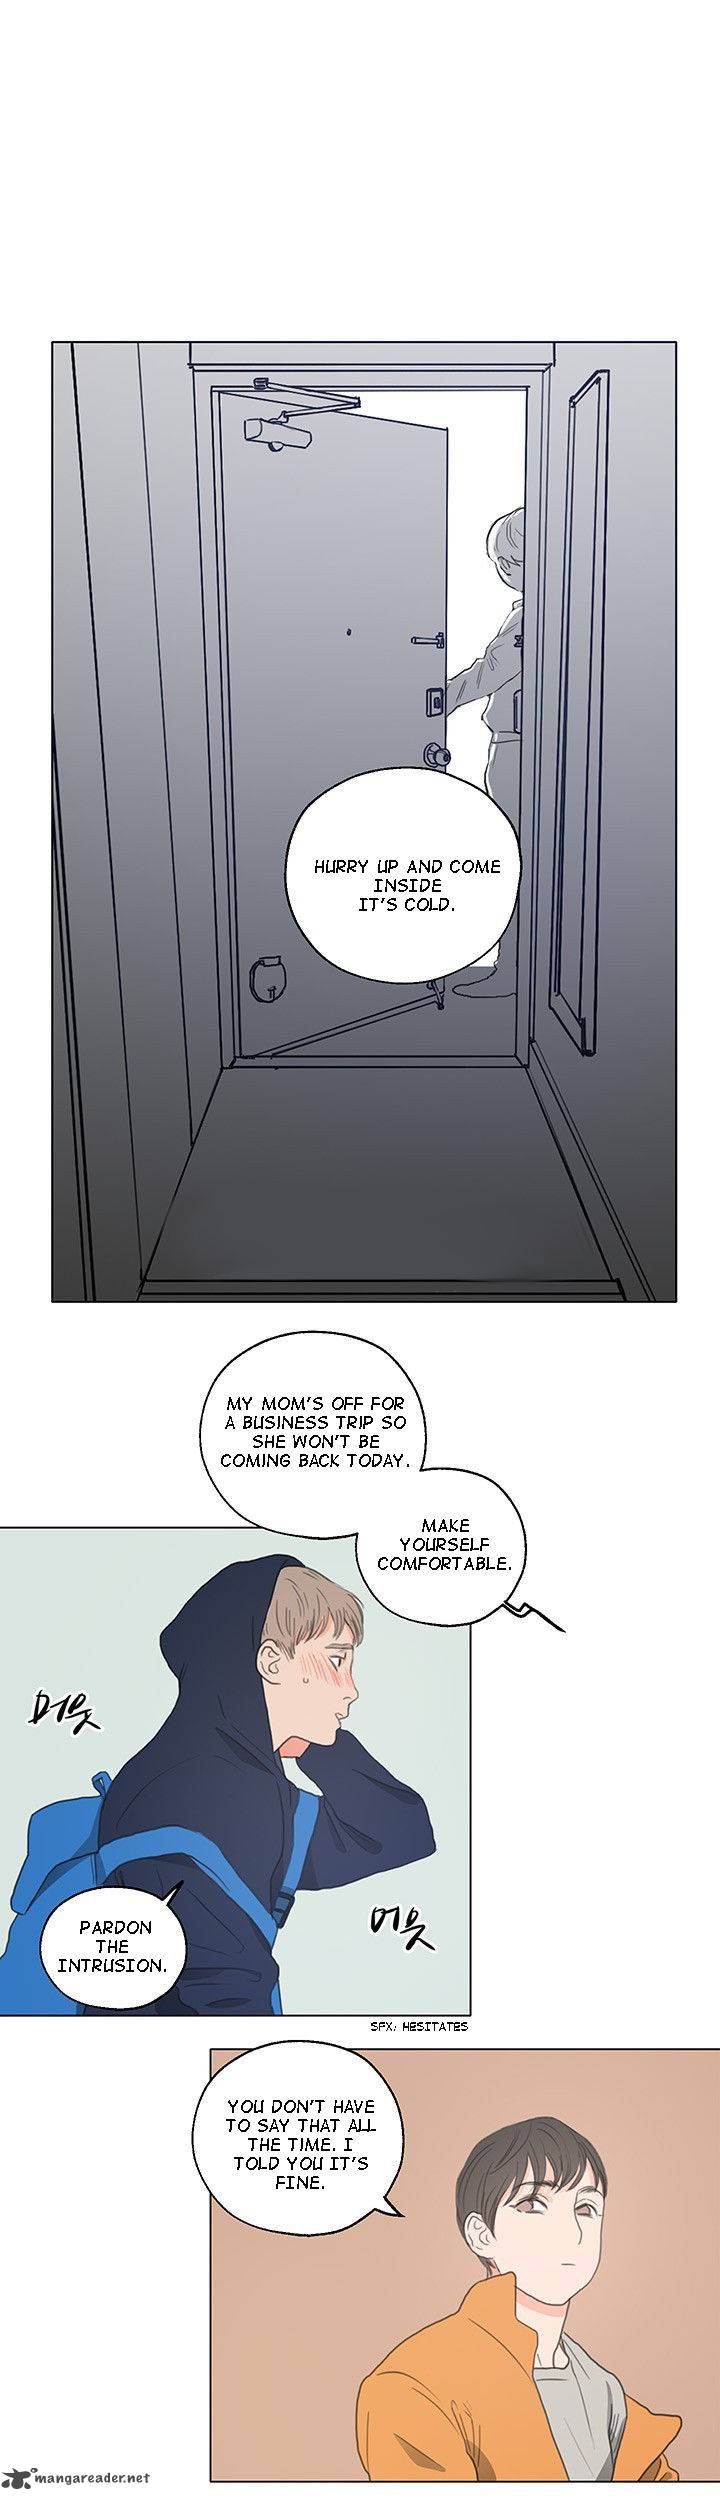 1305 Chapter 1 Page 20